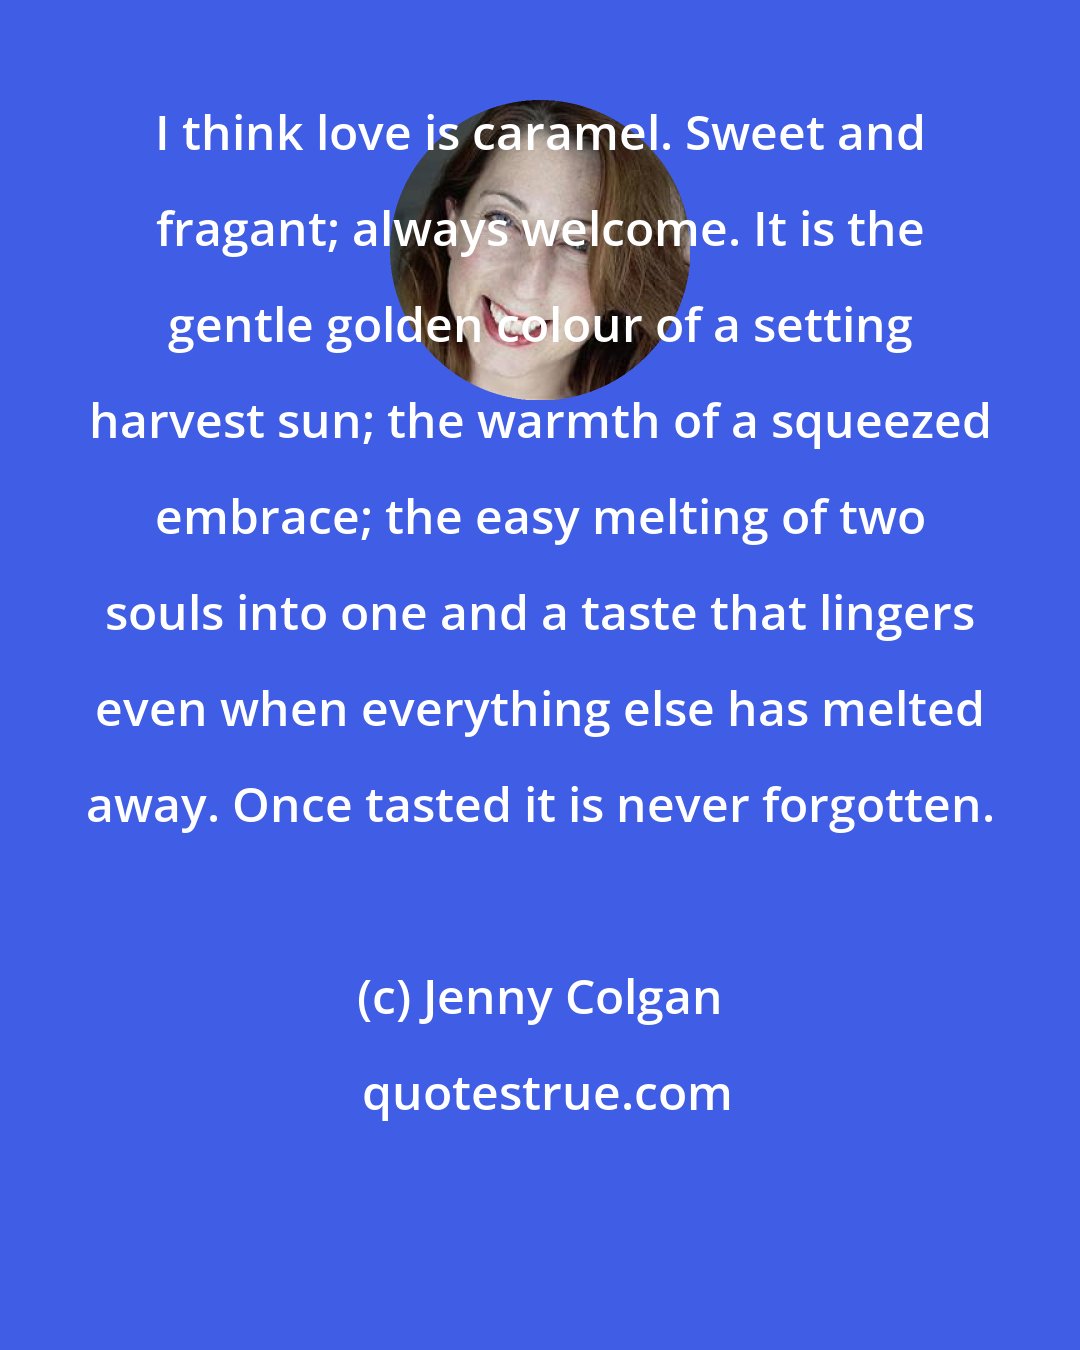 Jenny Colgan: I think love is caramel. Sweet and fragant; always welcome. It is the gentle golden colour of a setting harvest sun; the warmth of a squeezed embrace; the easy melting of two souls into one and a taste that lingers even when everything else has melted away. Once tasted it is never forgotten.